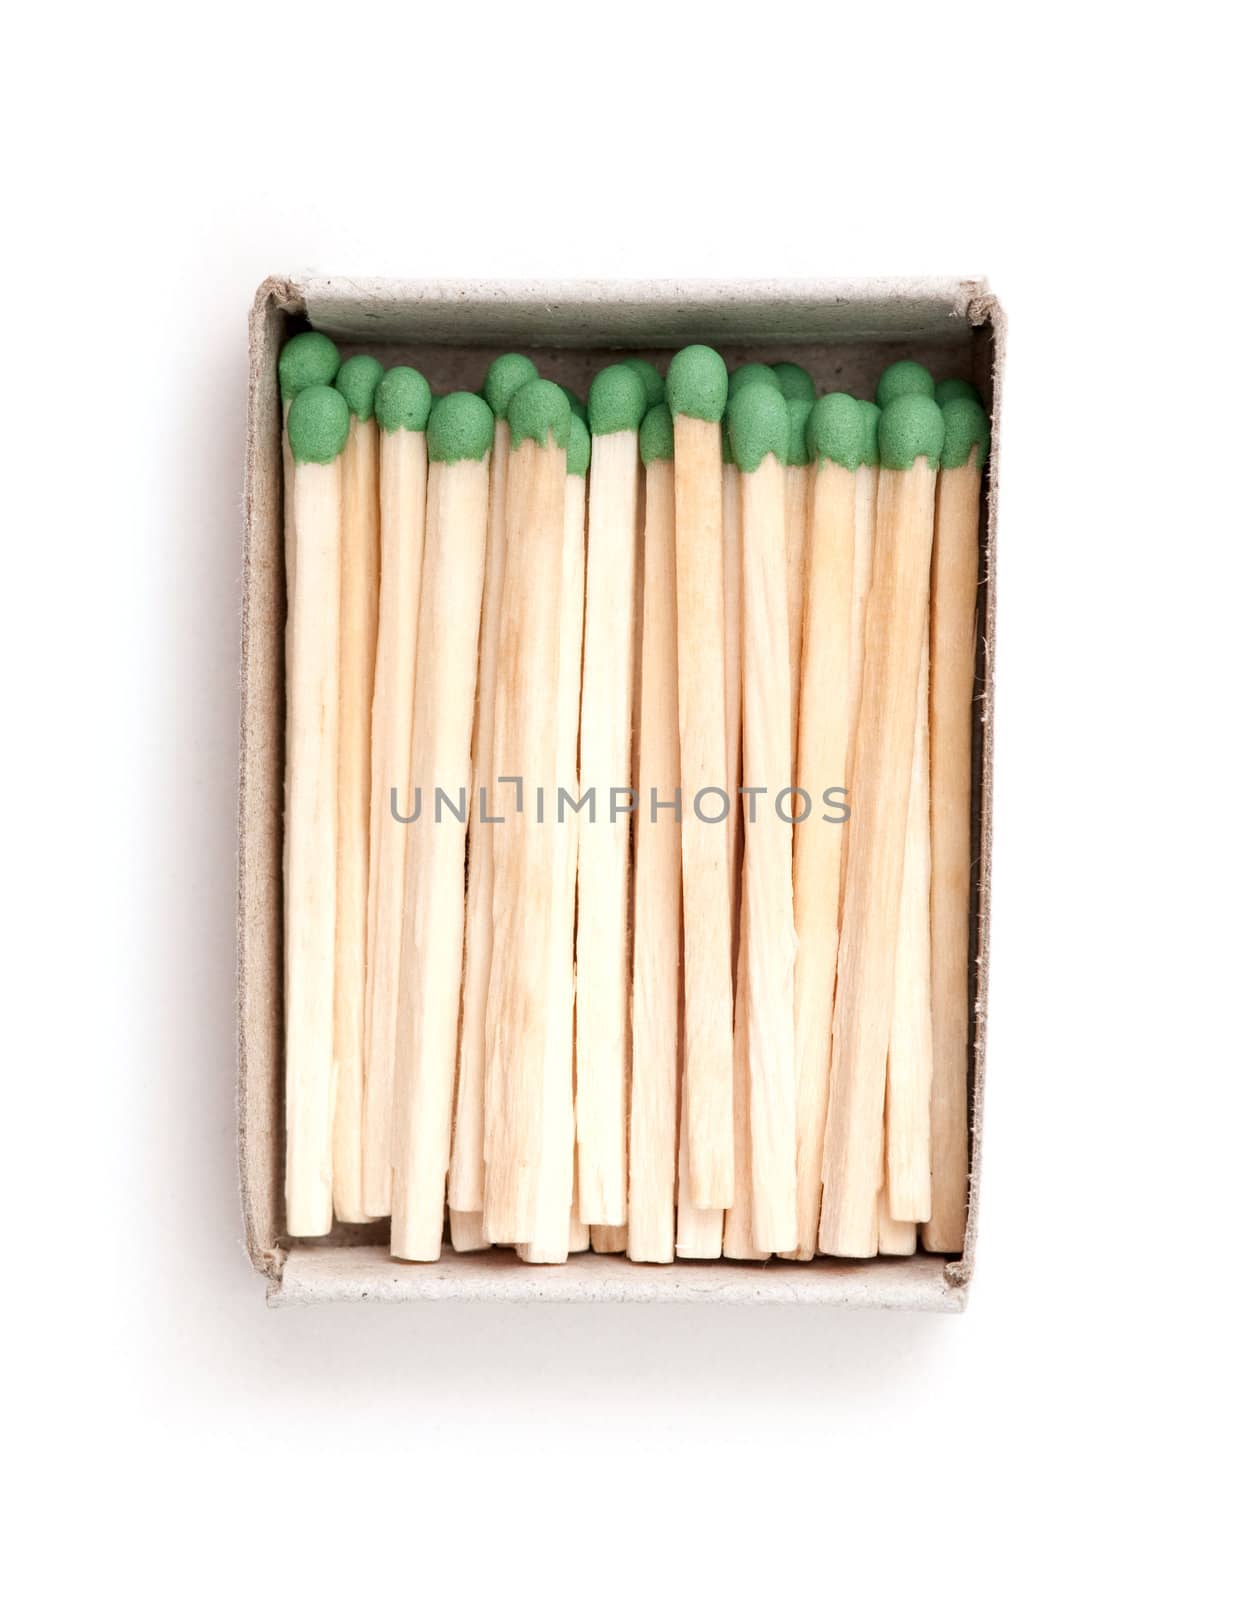 Matches in a box by DNKSTUDIO